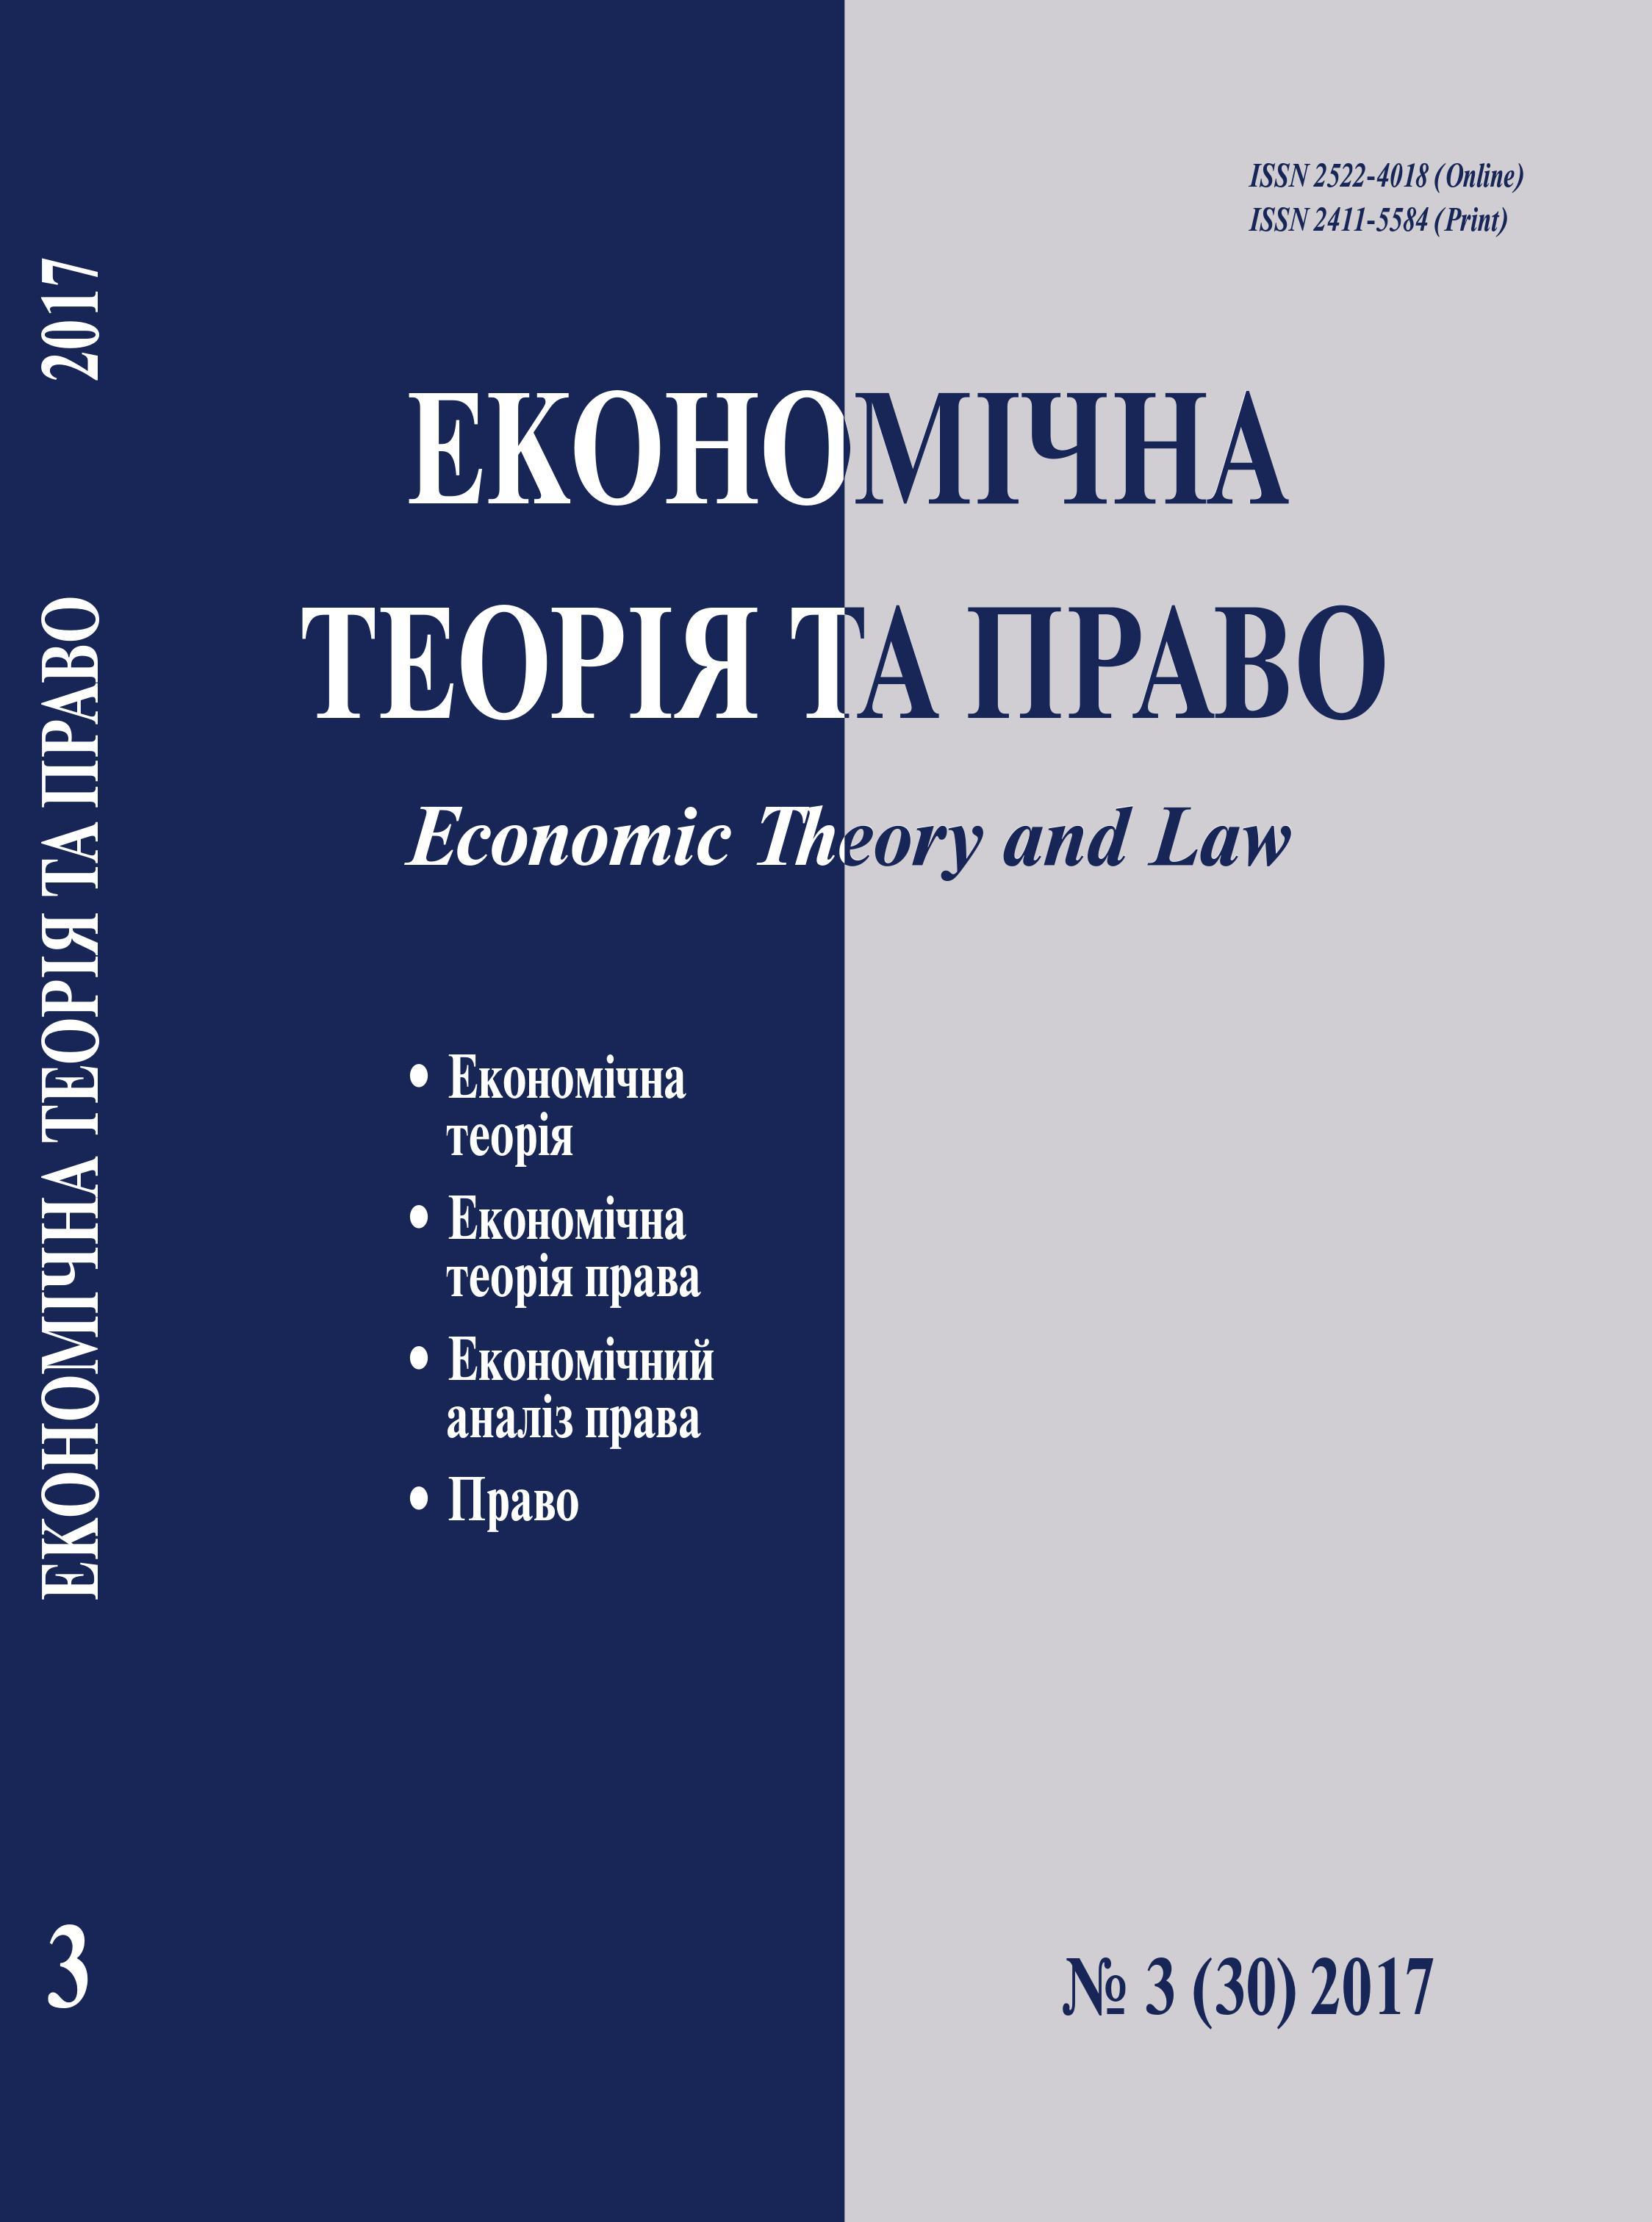 Transaction costs of taxation as a component of the international competitiveness of a country Cover Image